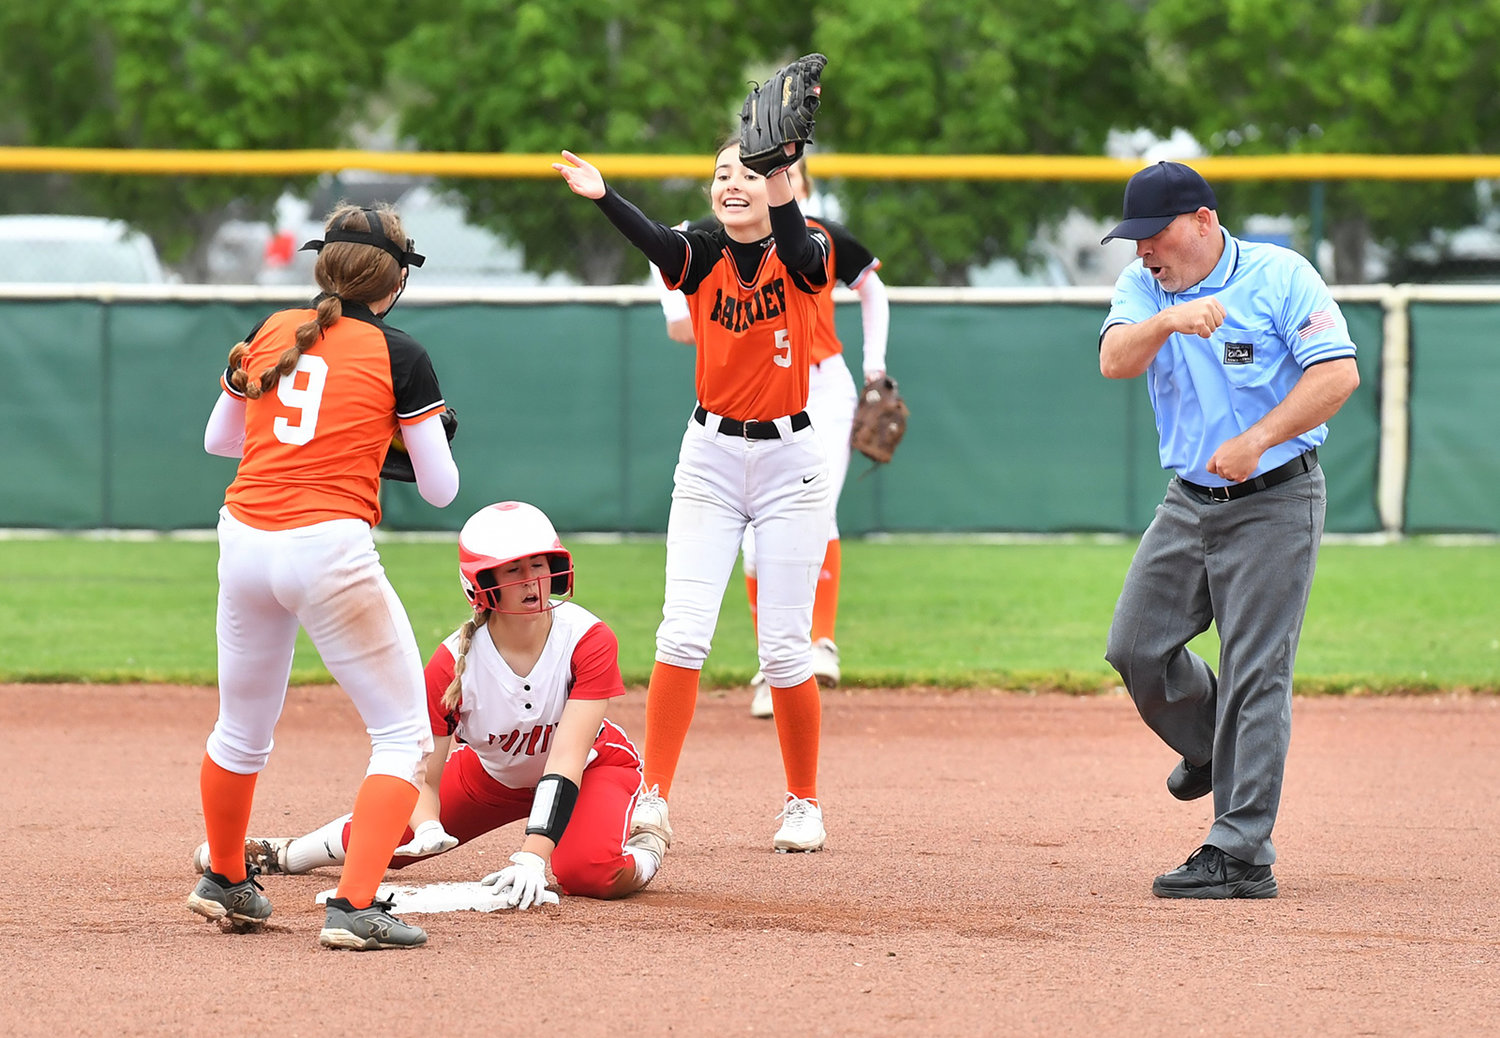 Rainier's Brooklynn Swenson (9) and Alyssa Lofgren (5) react as a Liberty player is called out on an attempted stolen base during the first round of the 2B state softball tournament in Yakima Friday morning.